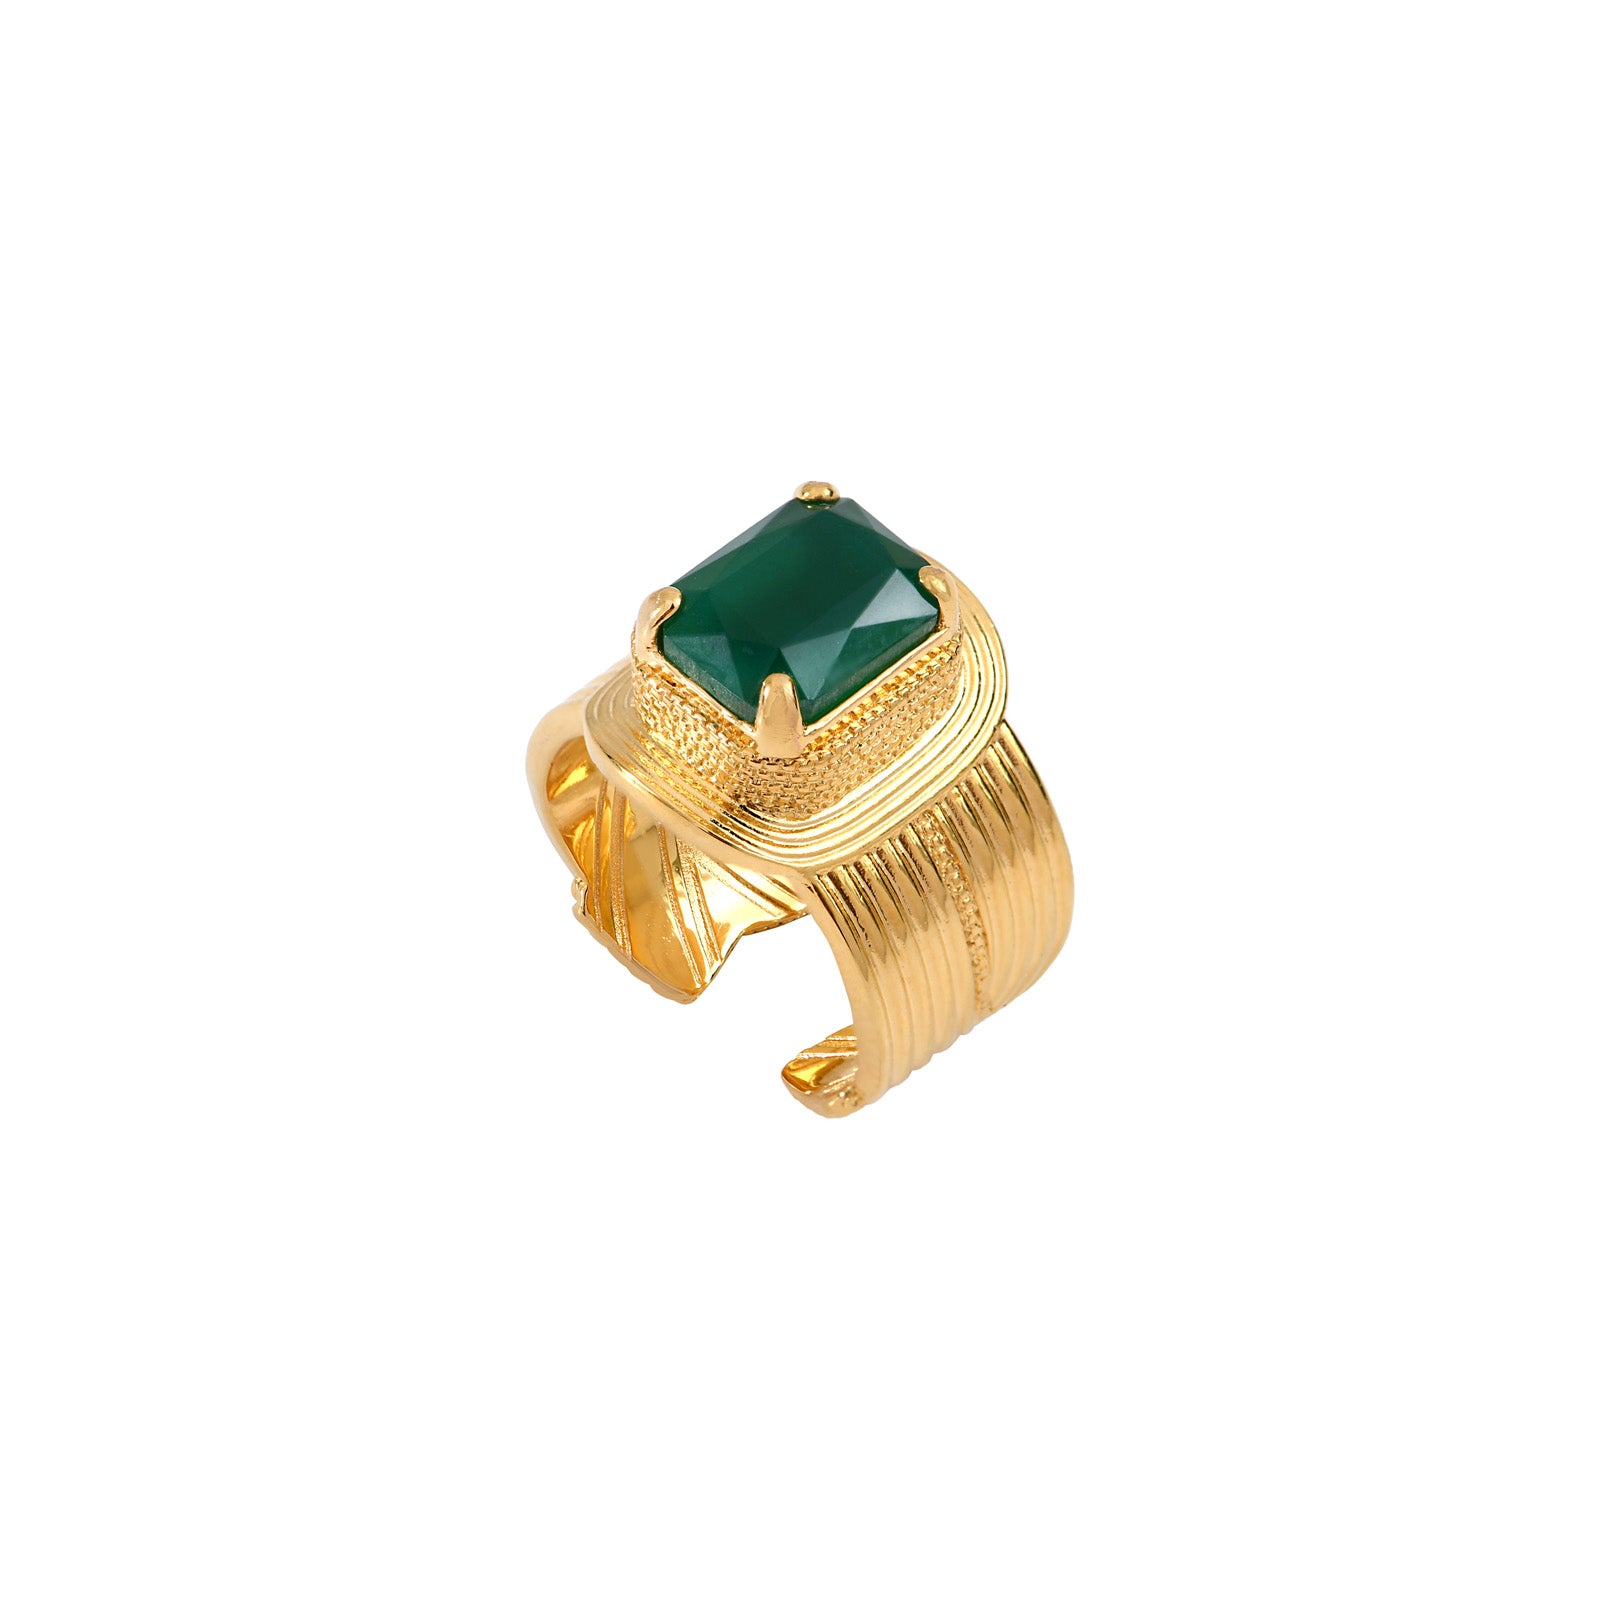 Art Deco style ring in green